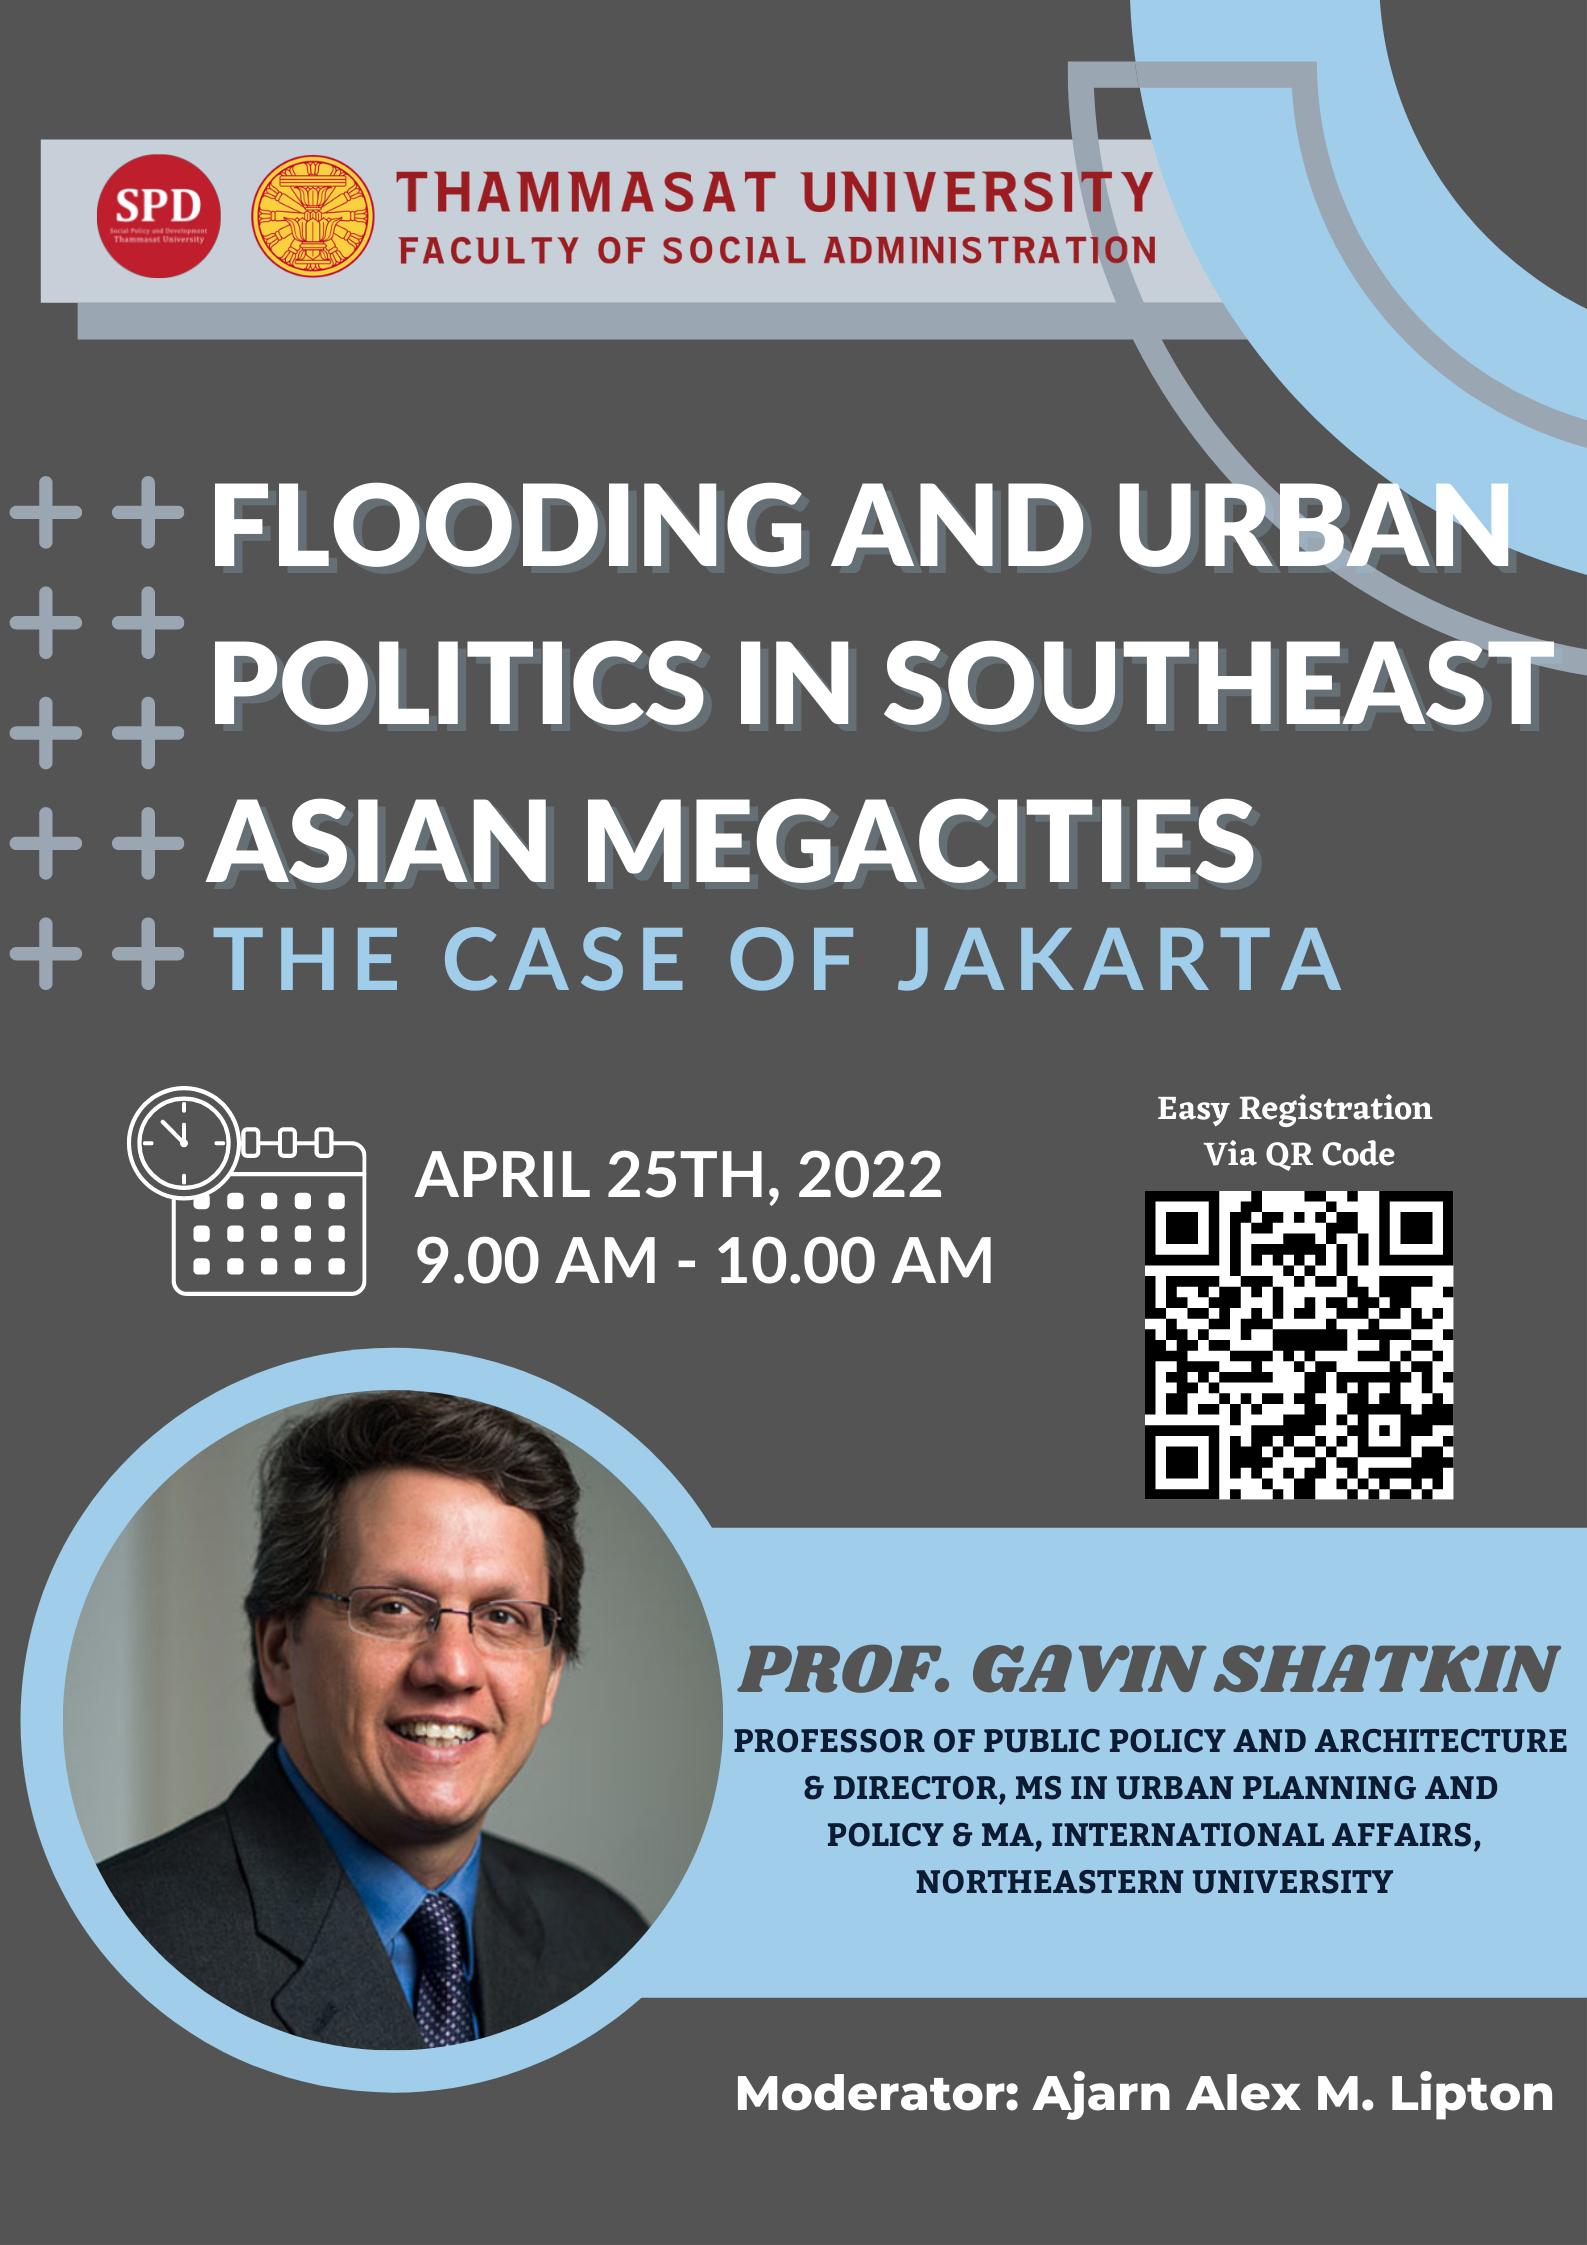 SPD  ongoing Speaker Series "Dr. Gavin Shatkin, Professor of Public Policy and Architecture at Northeastern University"